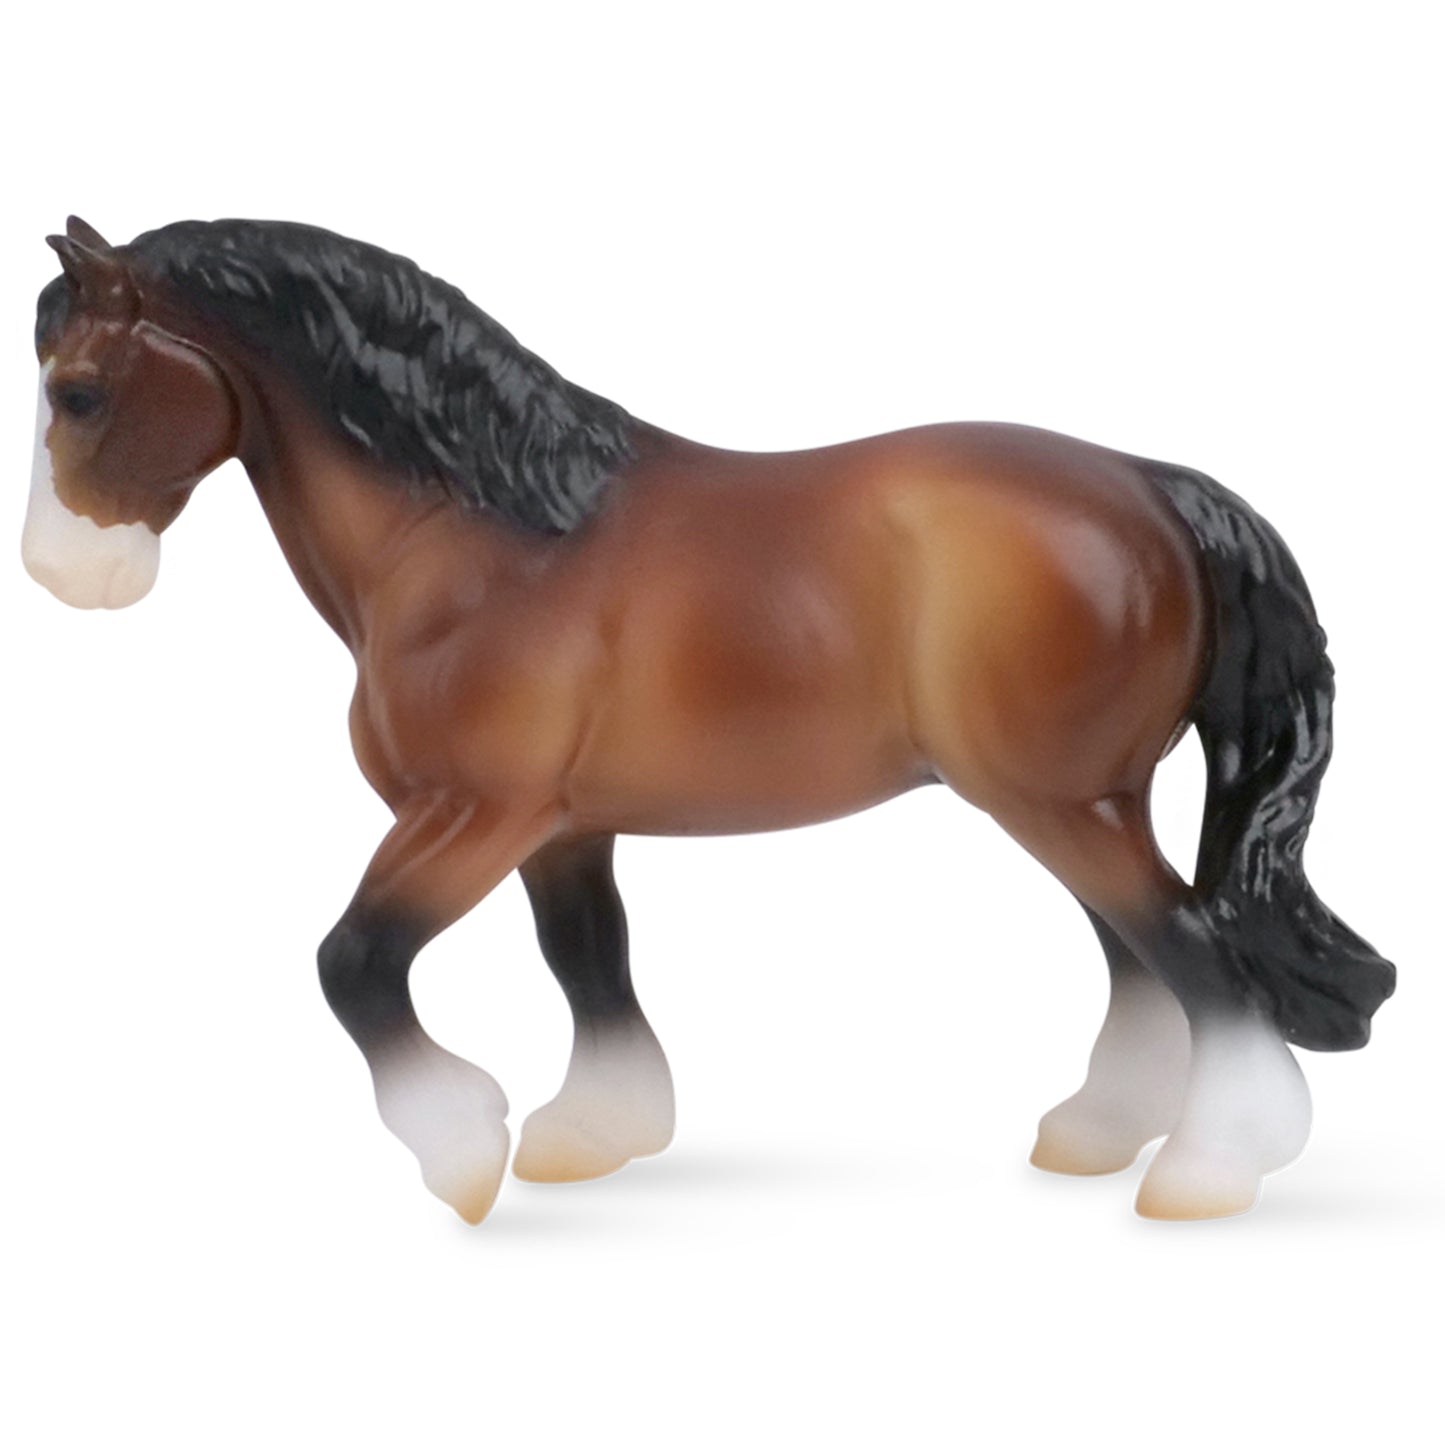 Breyer Stablemates Series 2 Singles Clydesdale